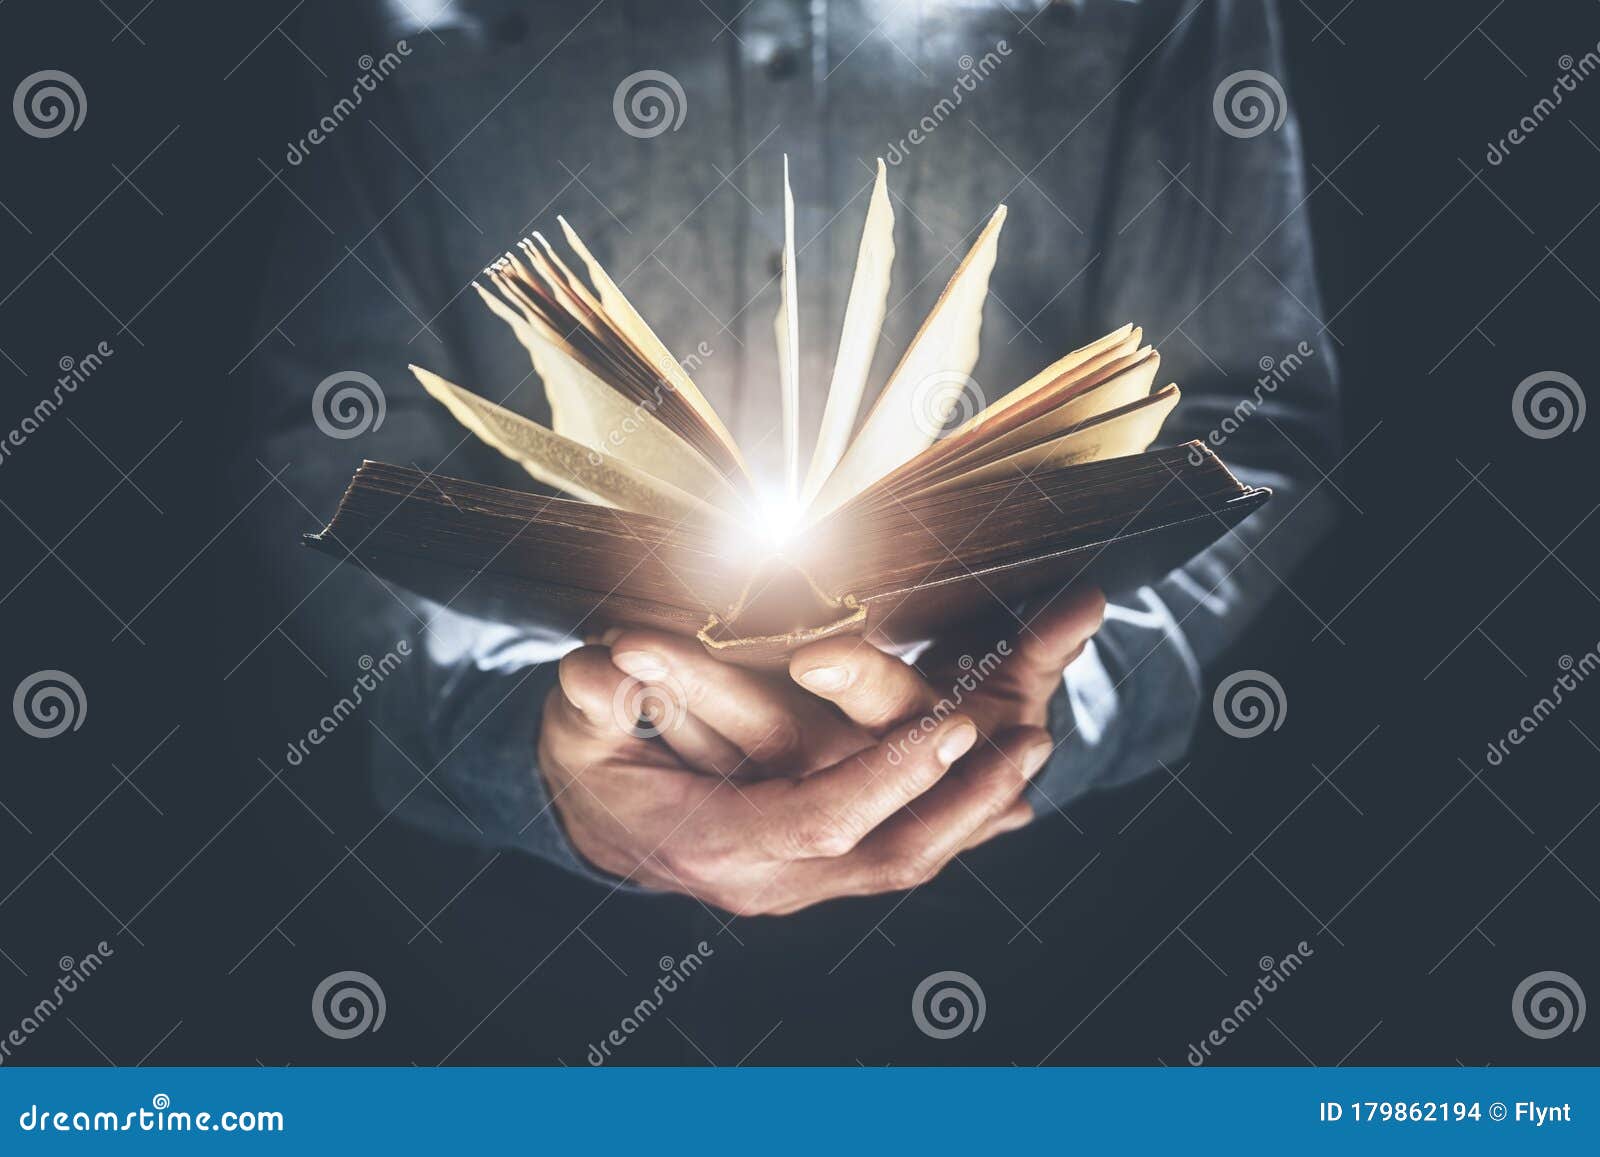 man holding and reading the holy bible or a book